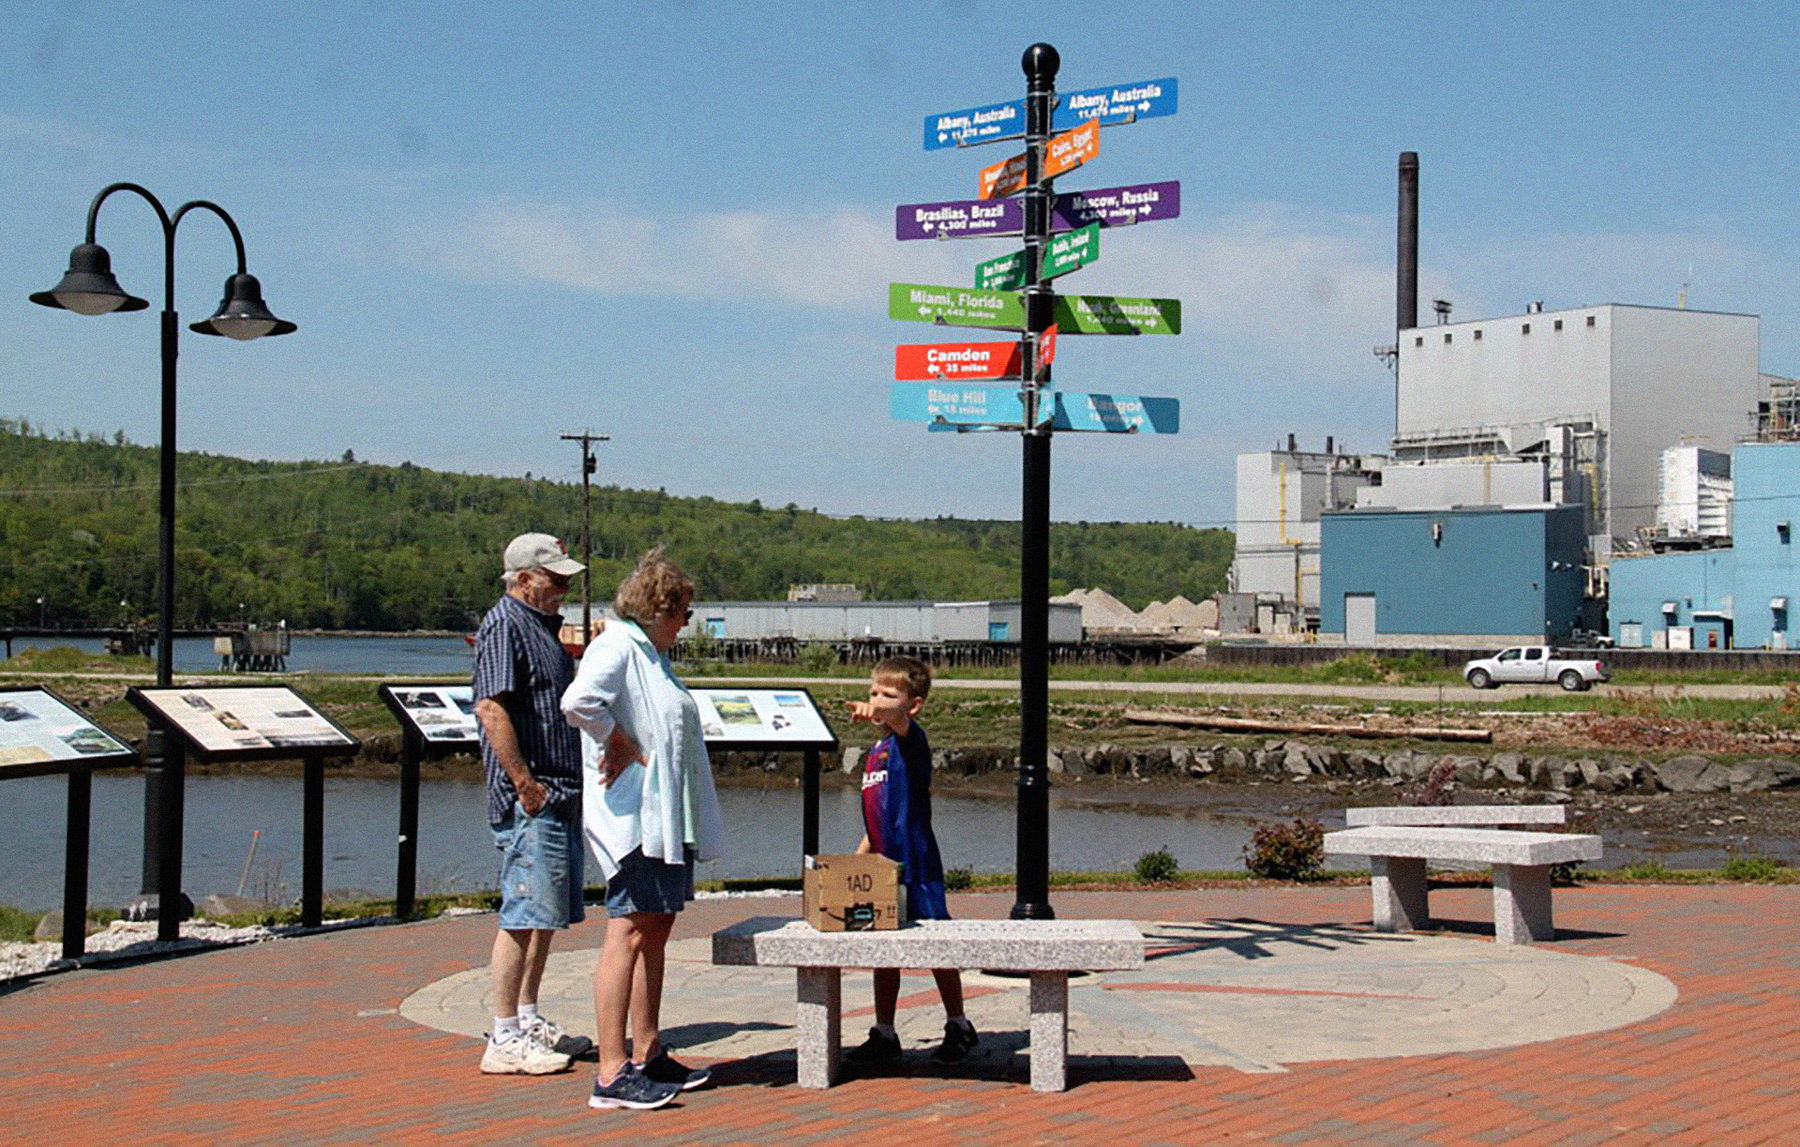 A small child points as two older adults look at him. In the background, Bucksport, Maine's paper mill can be seen.